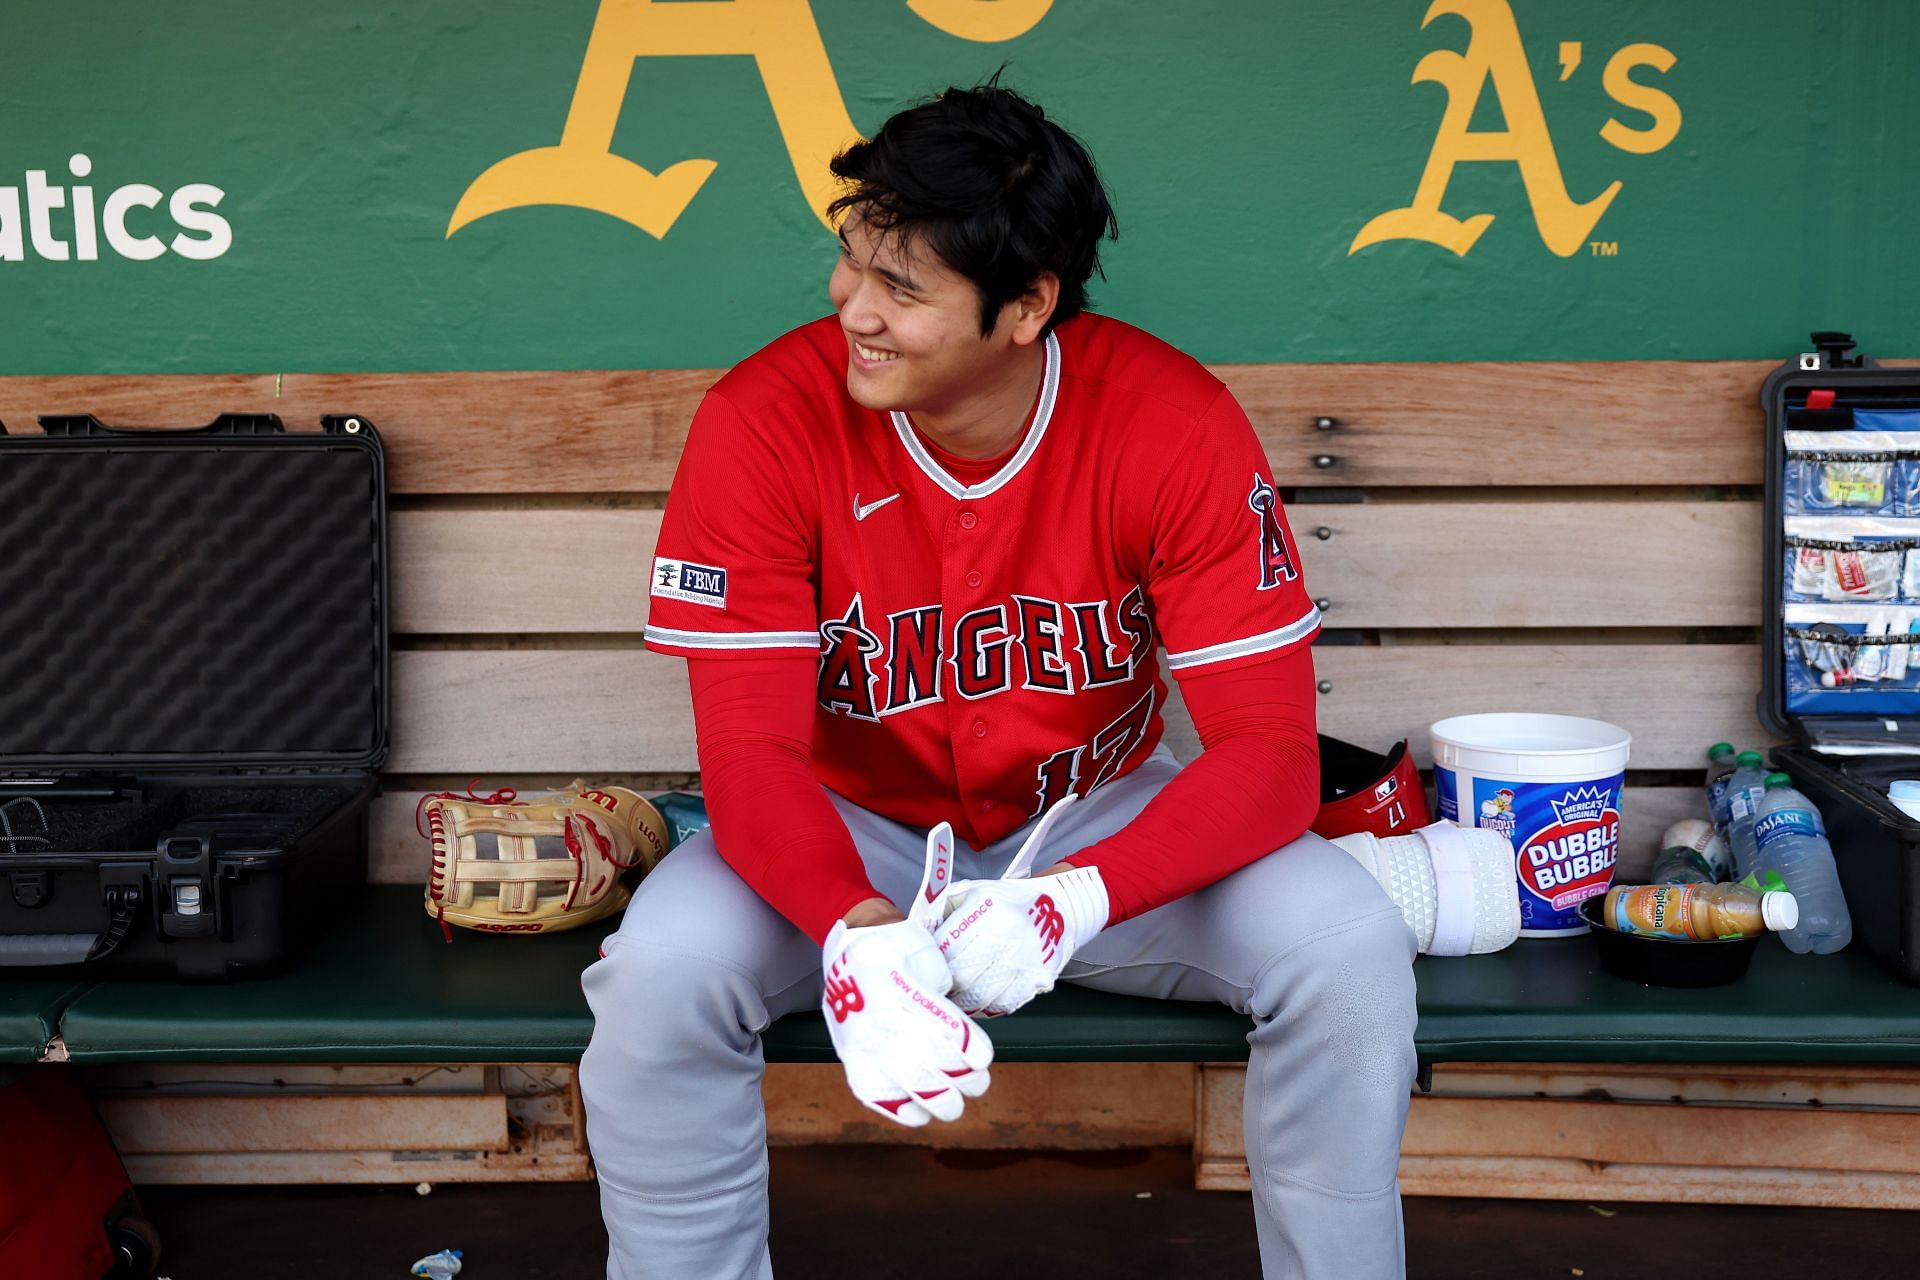 After losing Ohtani to the Dodgers, the Angels will be looking to fortify their offense, and Cody Bellinger could be an ideal fit.